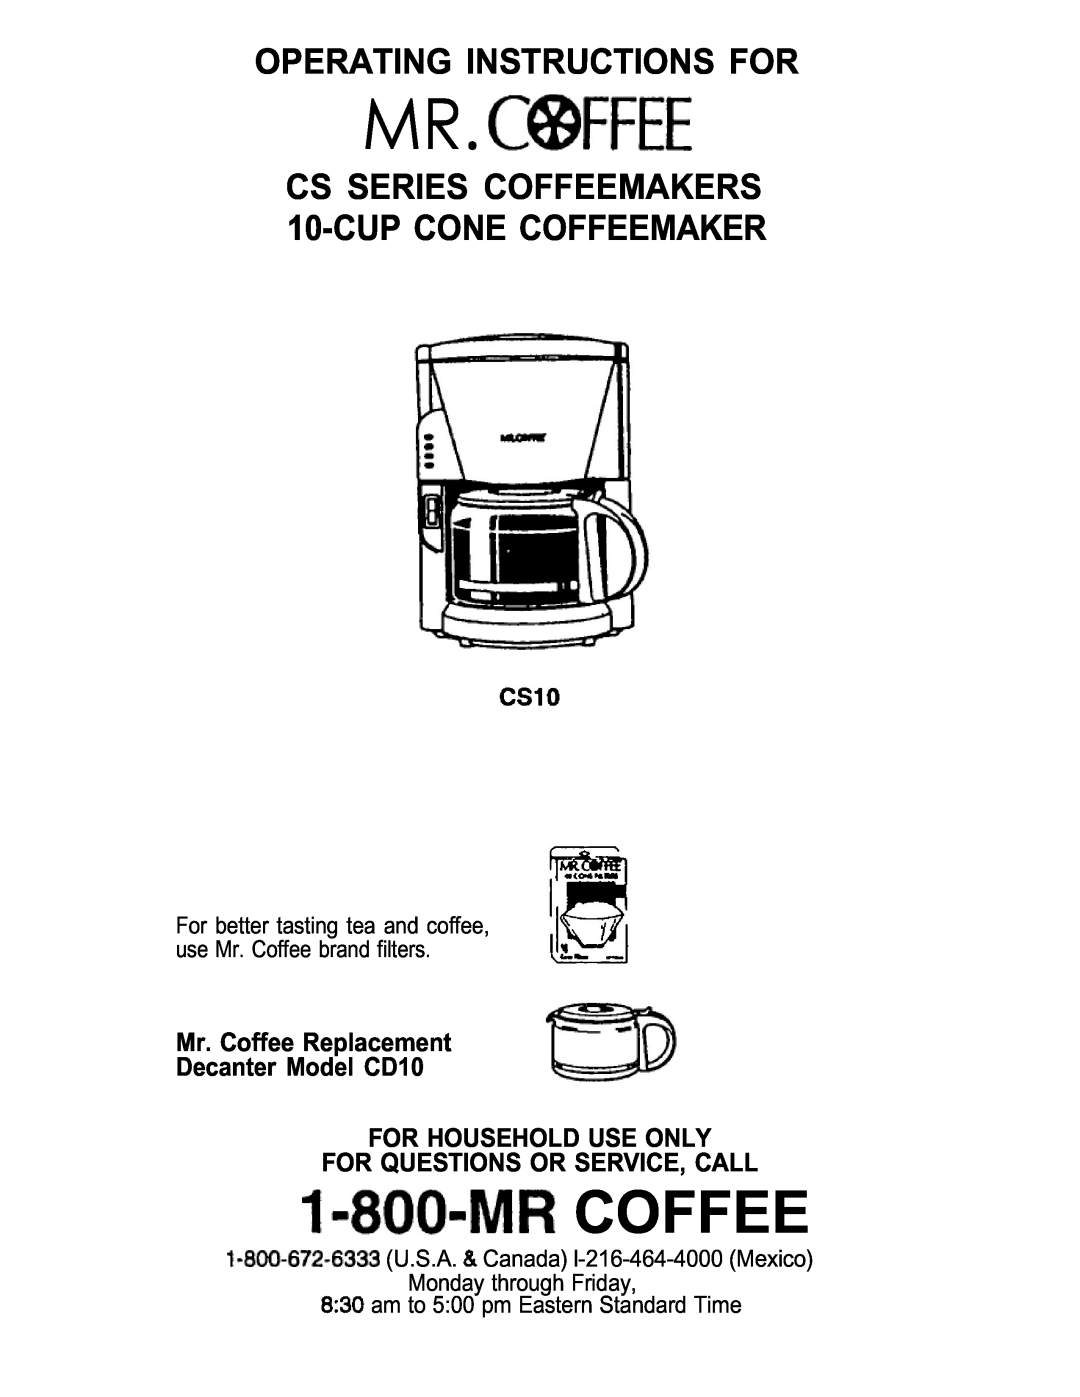 Capresso CS10 manual Coffee, Operating Instructions For, CS SERIES COFFEEMAKERS 10-CUP CONE COFFEEMAKER 